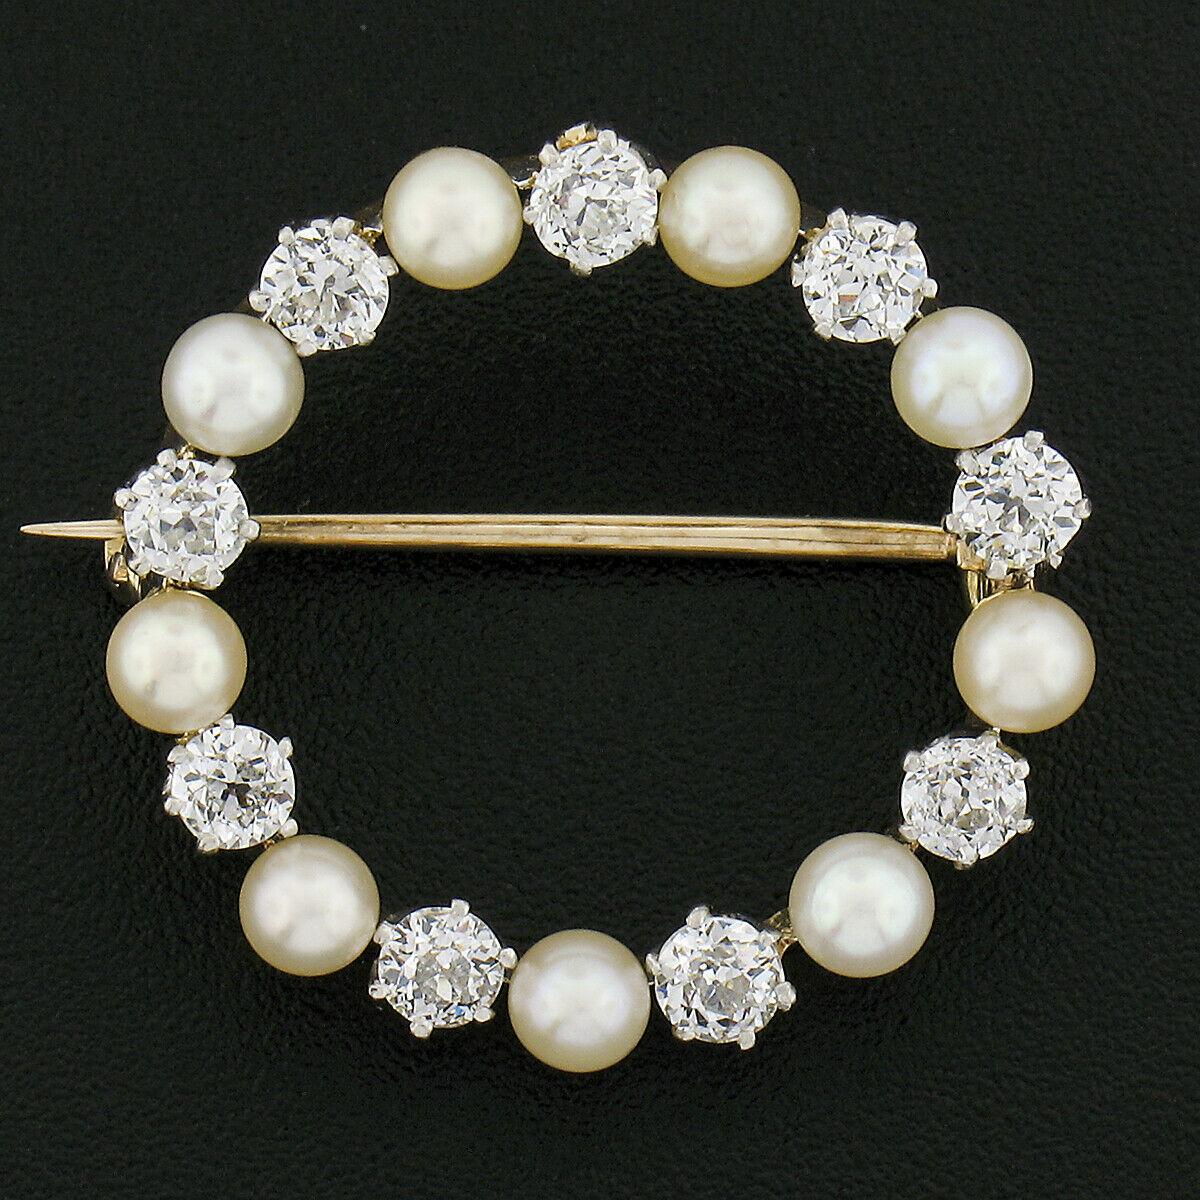 This absolutely gorgeous antique brooch was crafted during the Edwardian era from solid 18k yellow gold and platinum. It features an incredible circle of pearls and diamonds that alternate throughout its simple circular wreath design. The beautiful